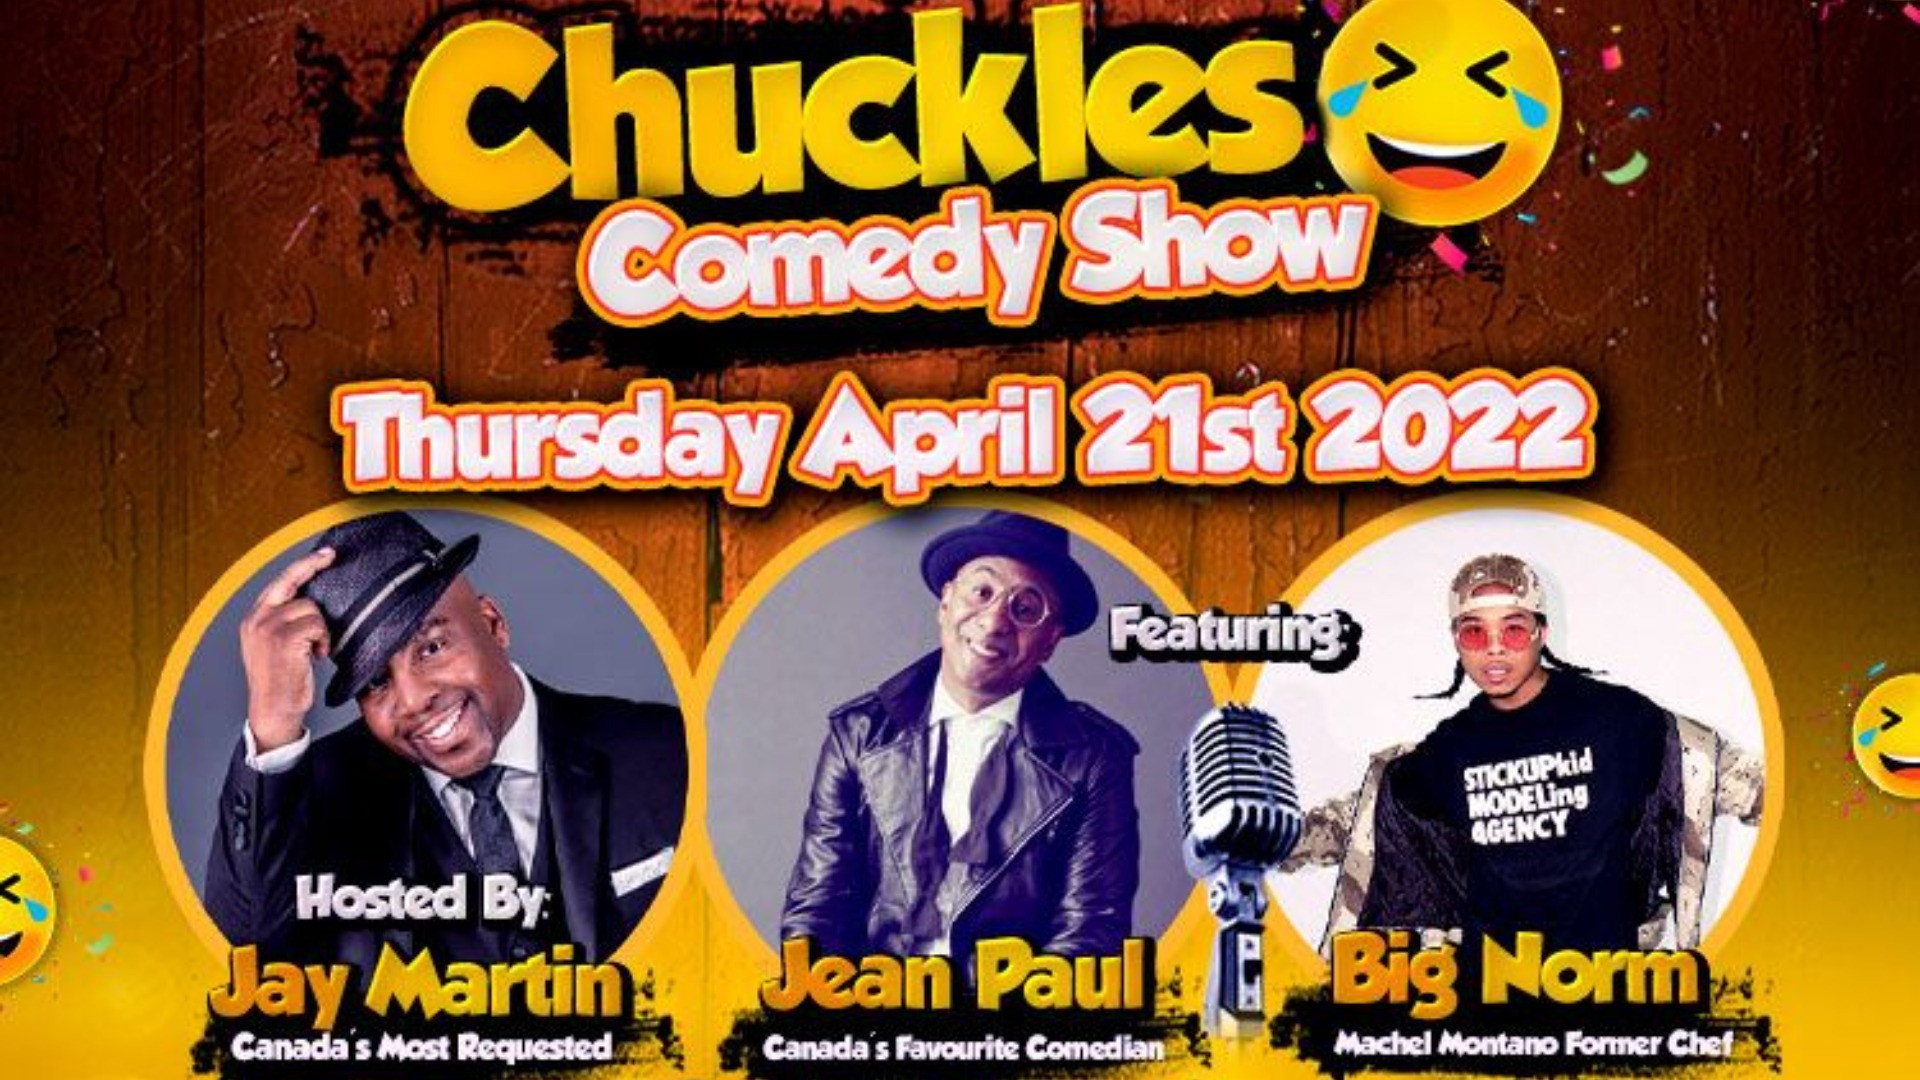 The Ticketport Chuckles Comedy Show